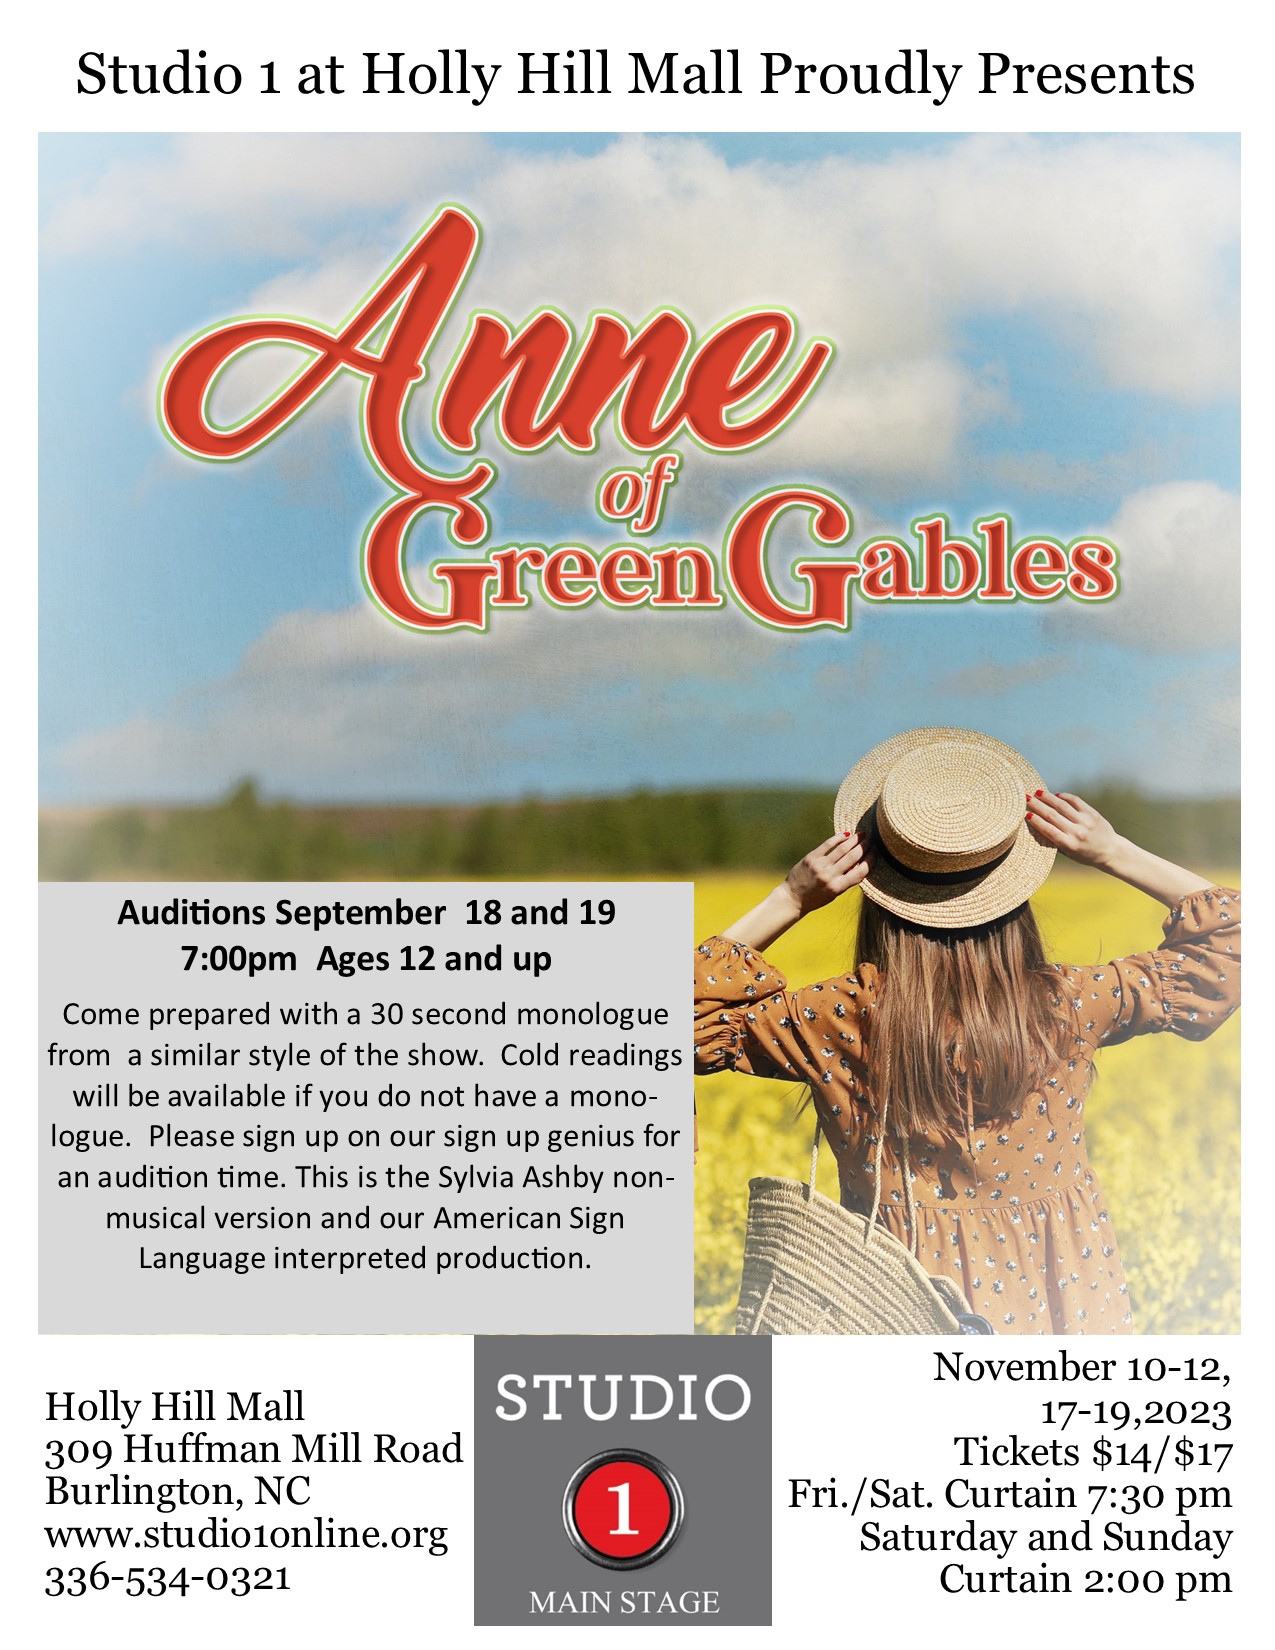 anne of green gables show